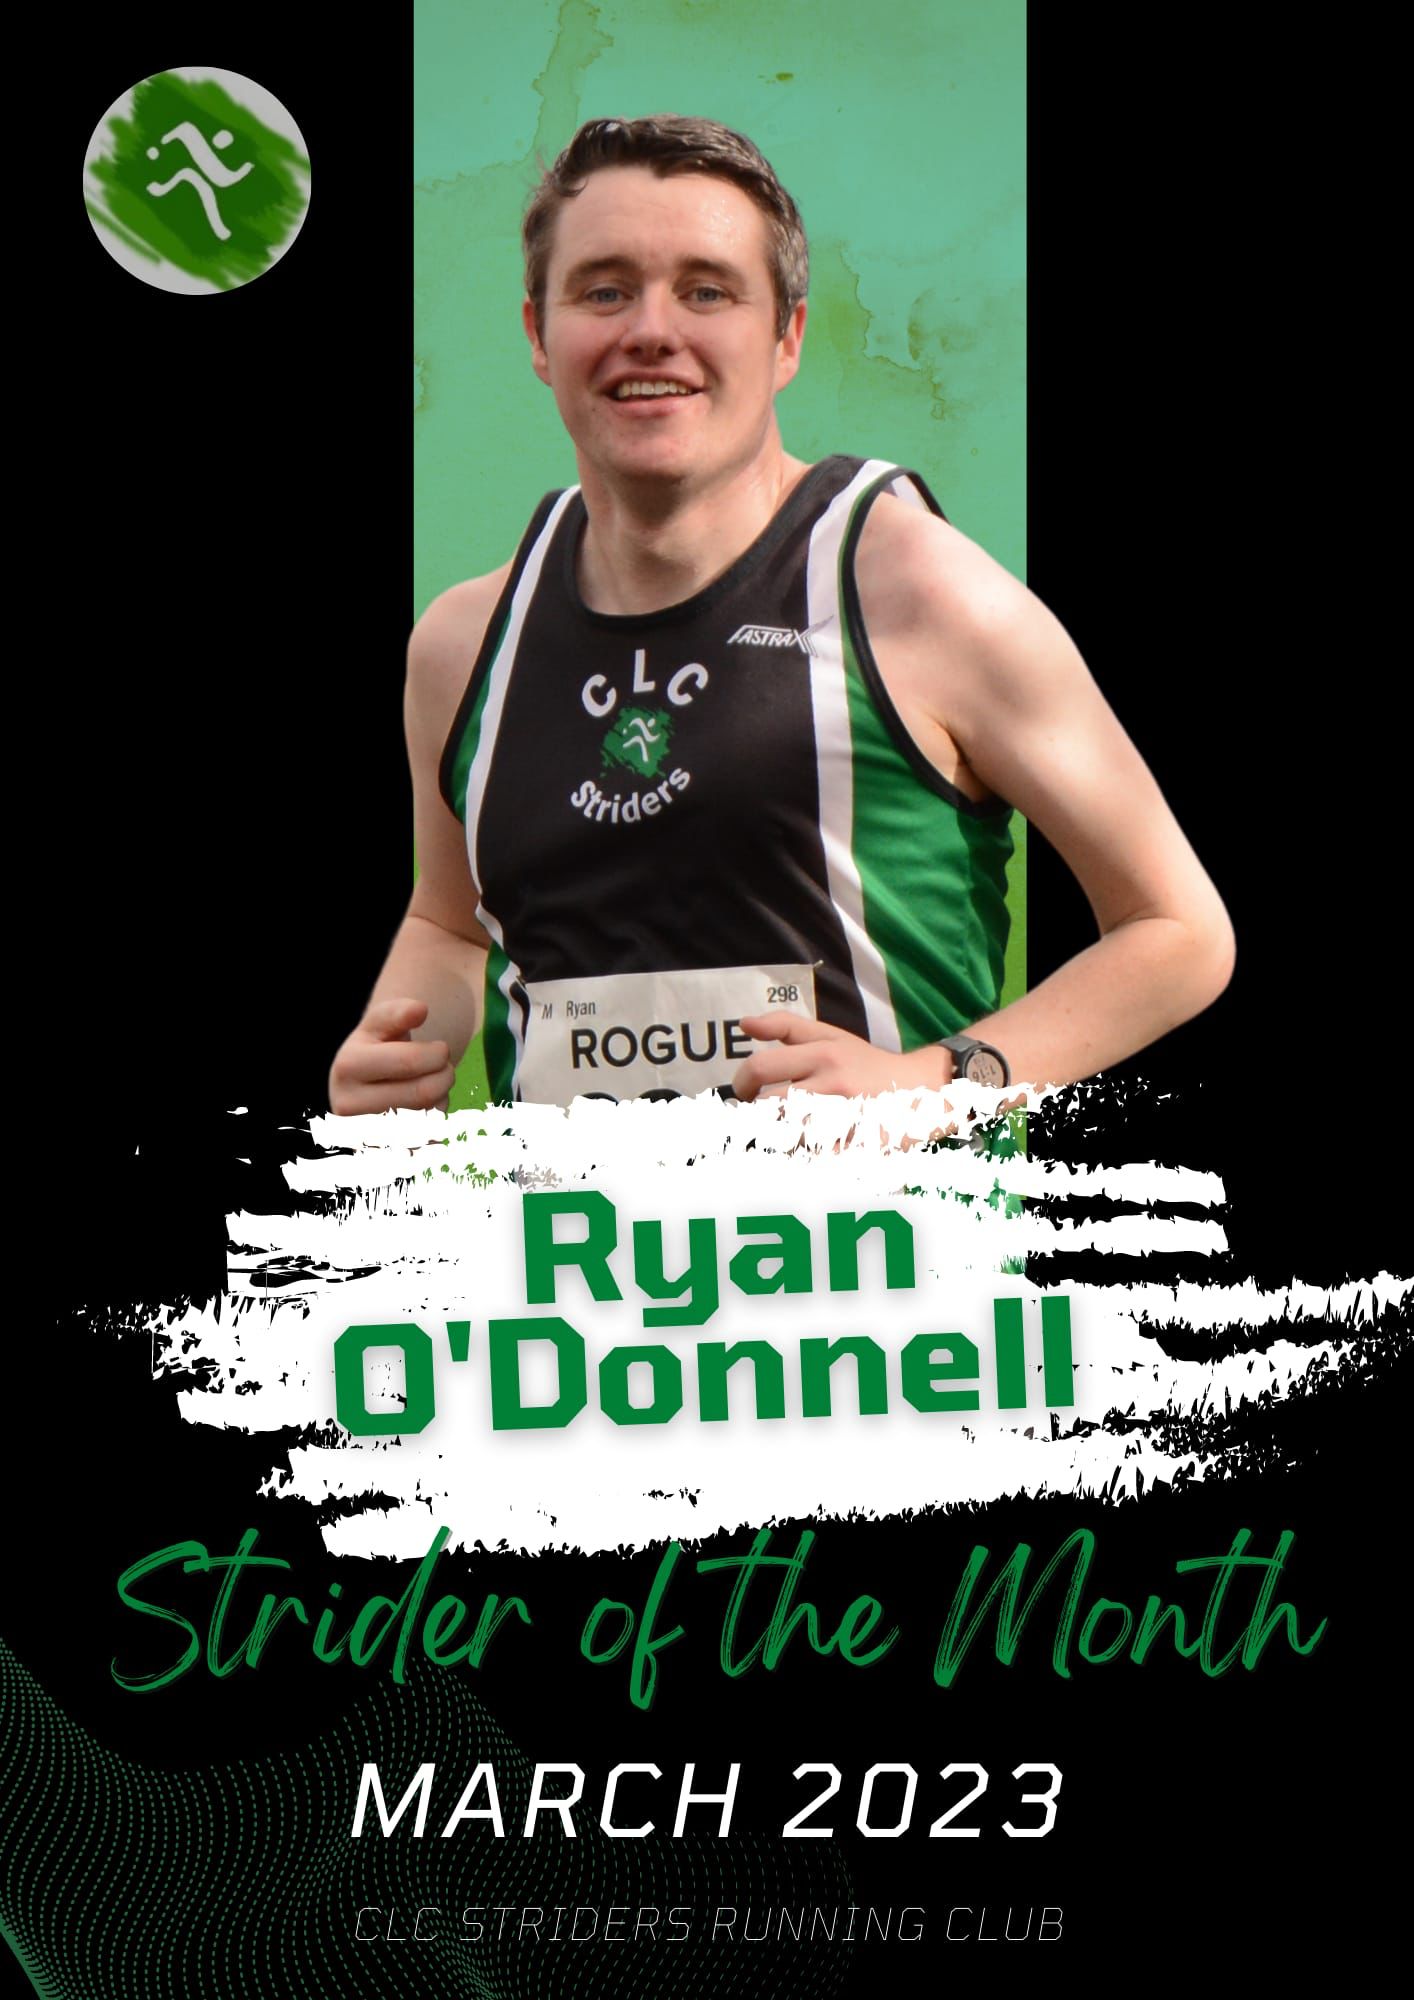 Strider of the month Ryan O'Donnell